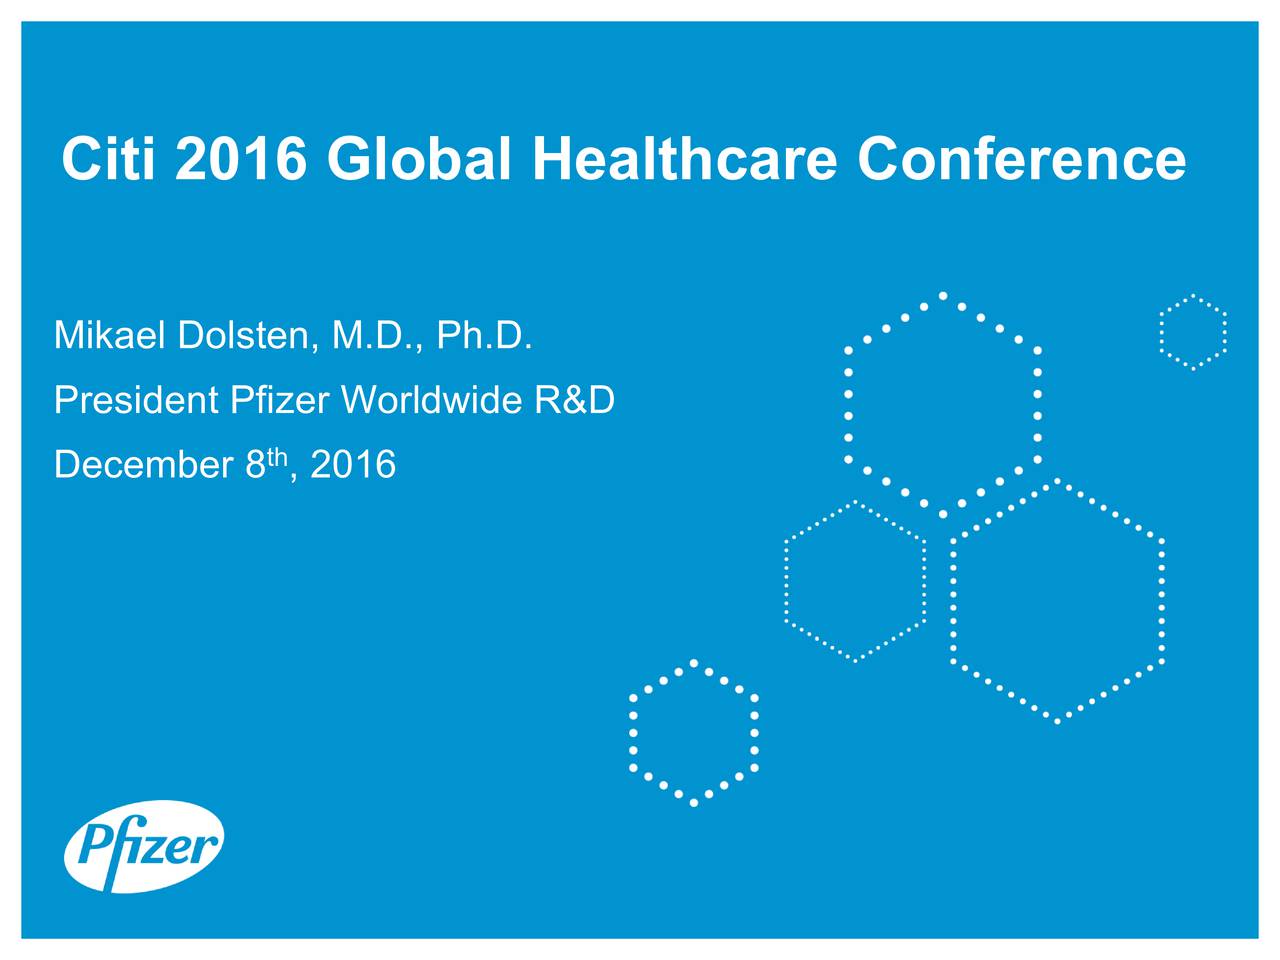 Pfizer (PFE) presents at Citi Global Healthcare Conference (NYSEPFE